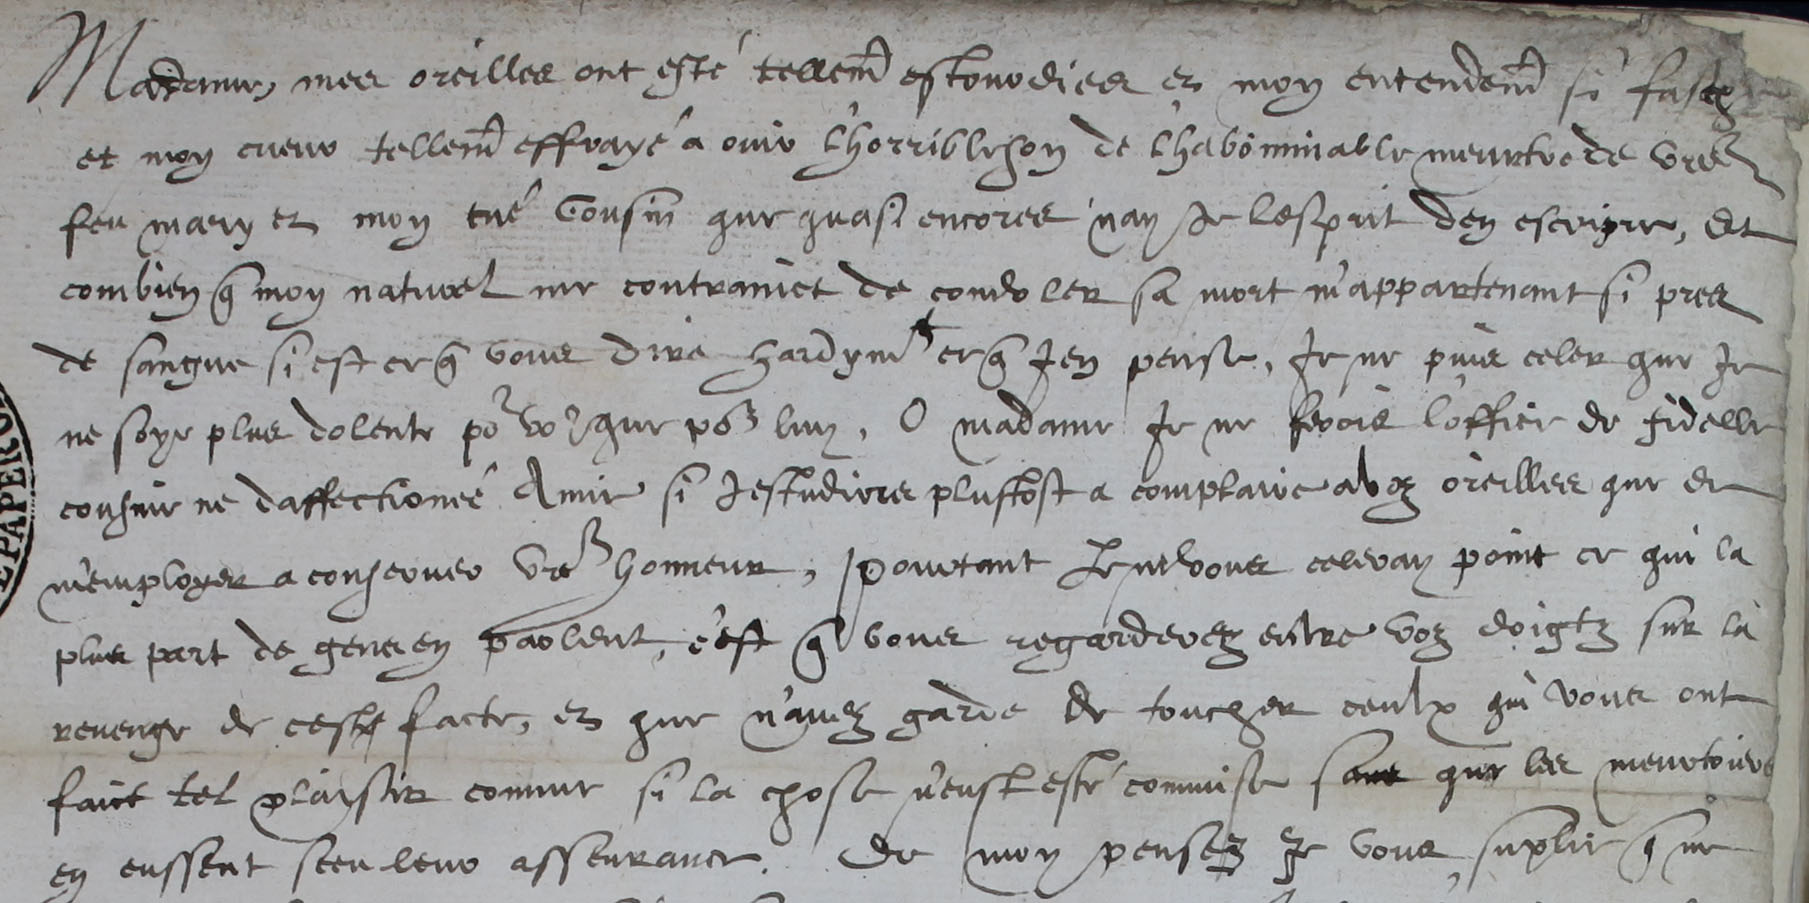 Elizabeth I to Mary Queen of Scots, 24 February 1567 (SP 52/13 f.17)